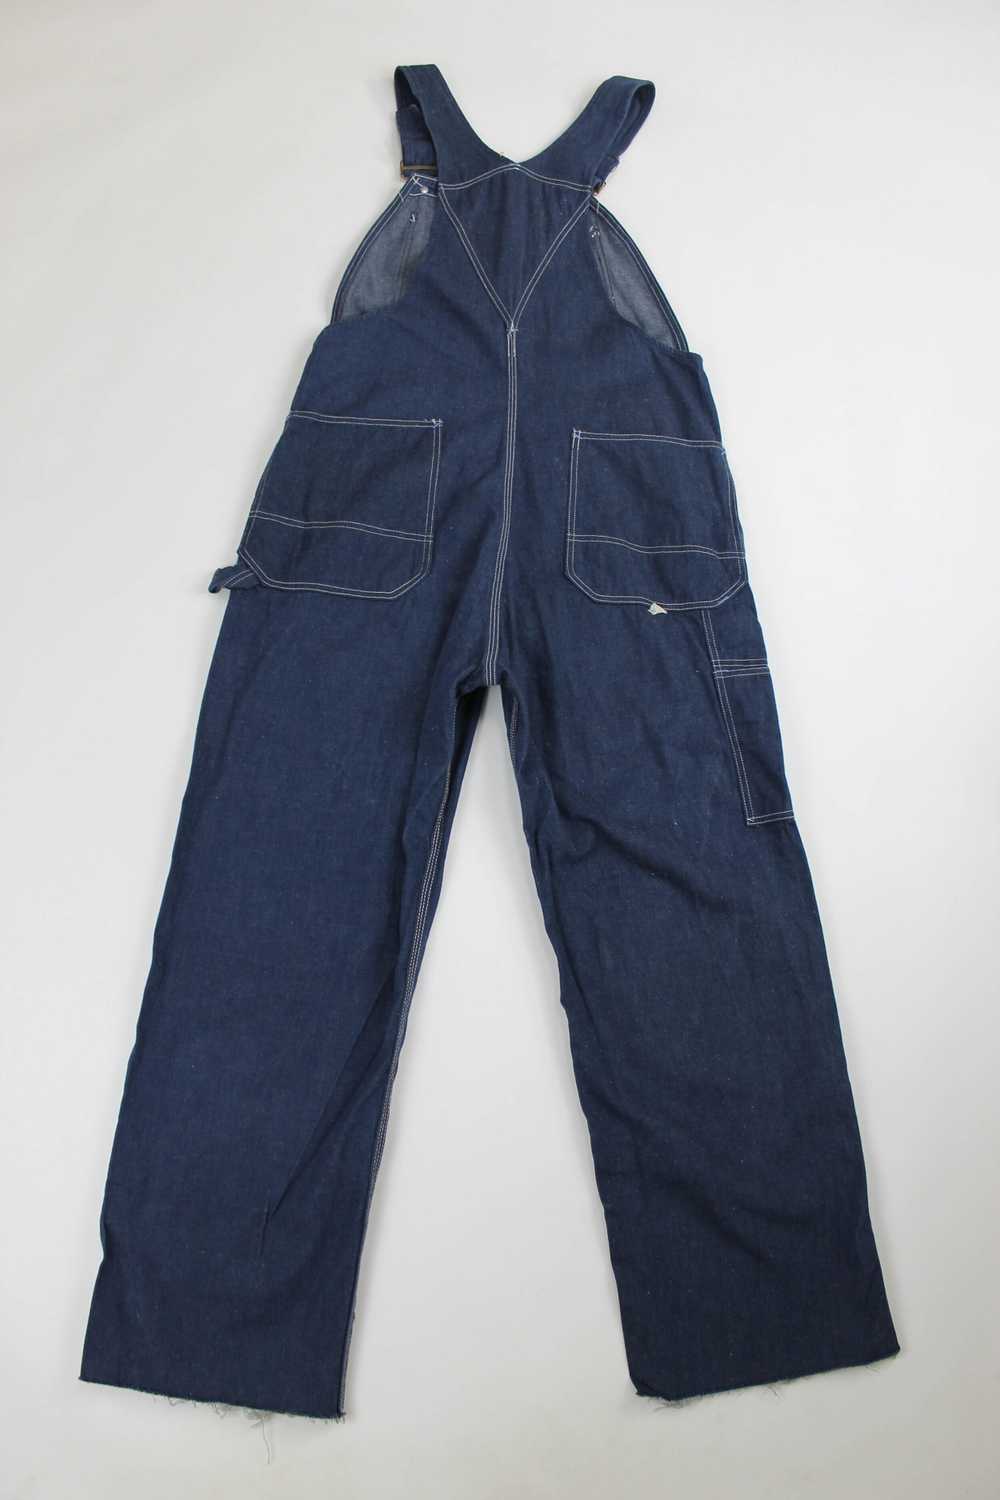 60s UNION MADE SEARS OVERALLS - SIZE 36 - image 2